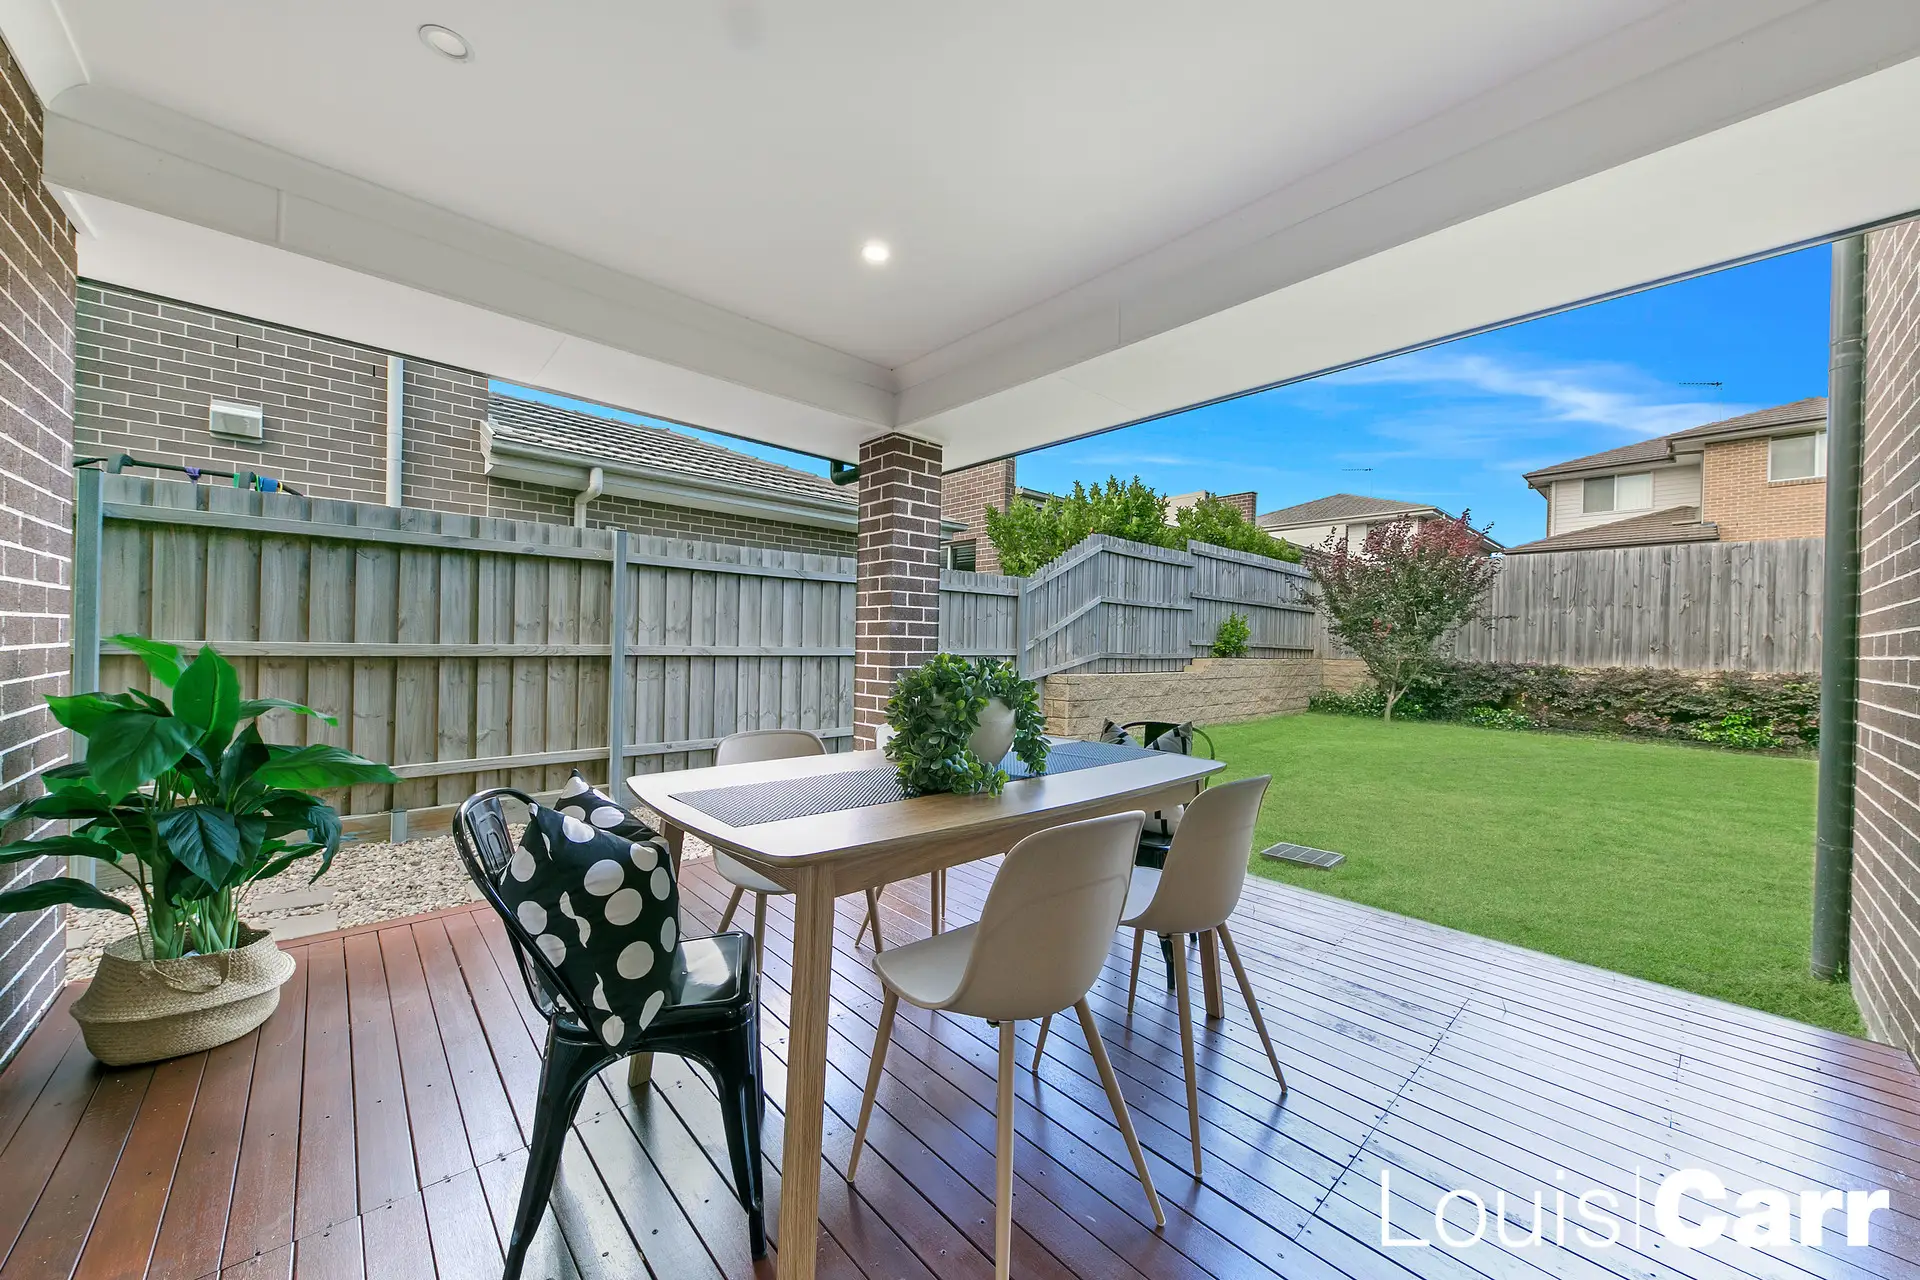 Photo #6: 4 Carisbrook Street, North Kellyville - Sold by Louis Carr Real Estate